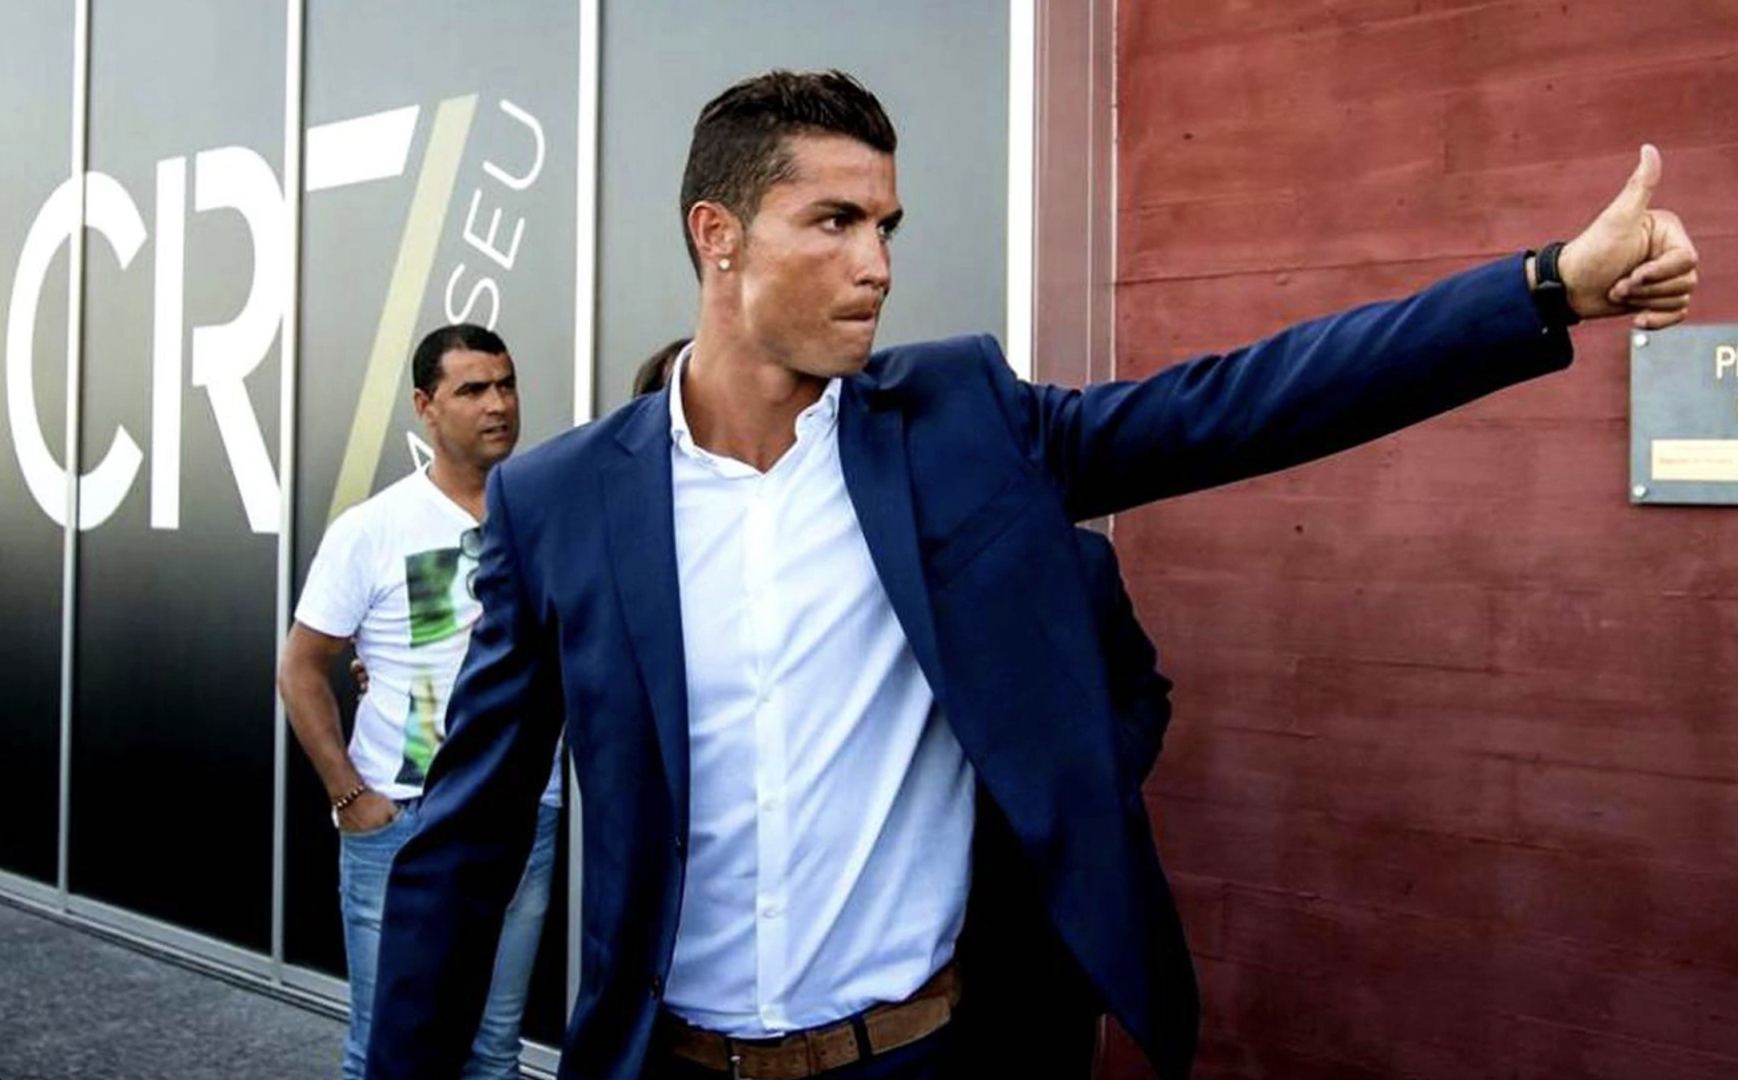 Pestana Group to launch CR7 brand in real estate - Essential Business